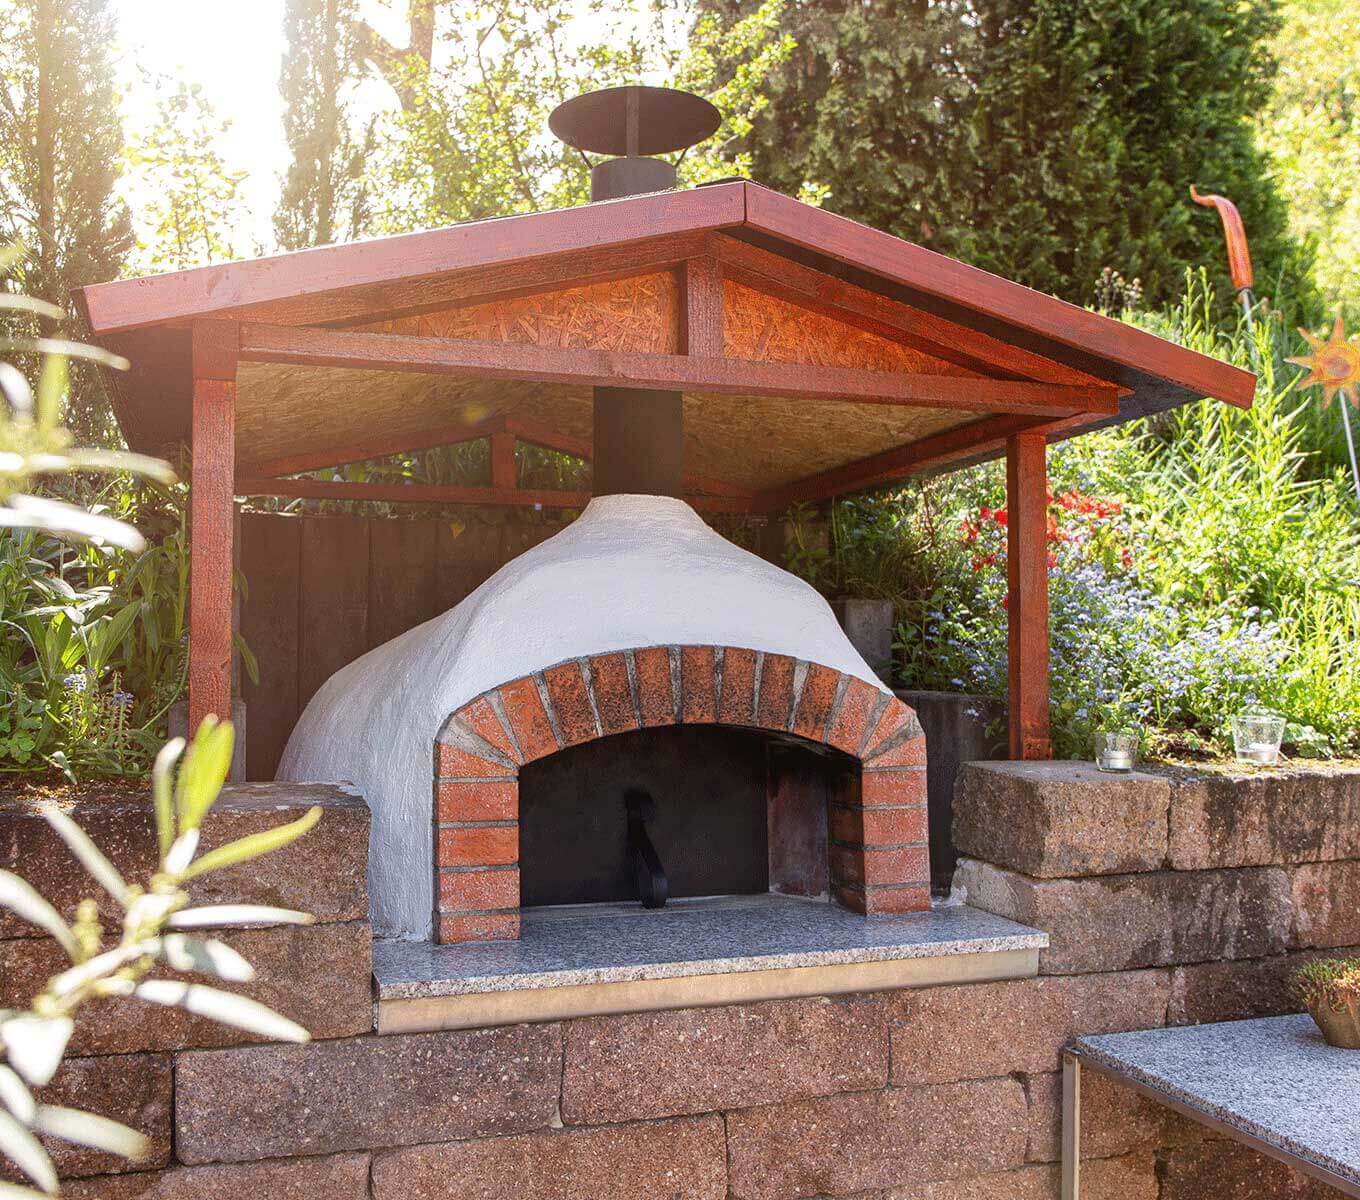 Build the pizza oven yourself!